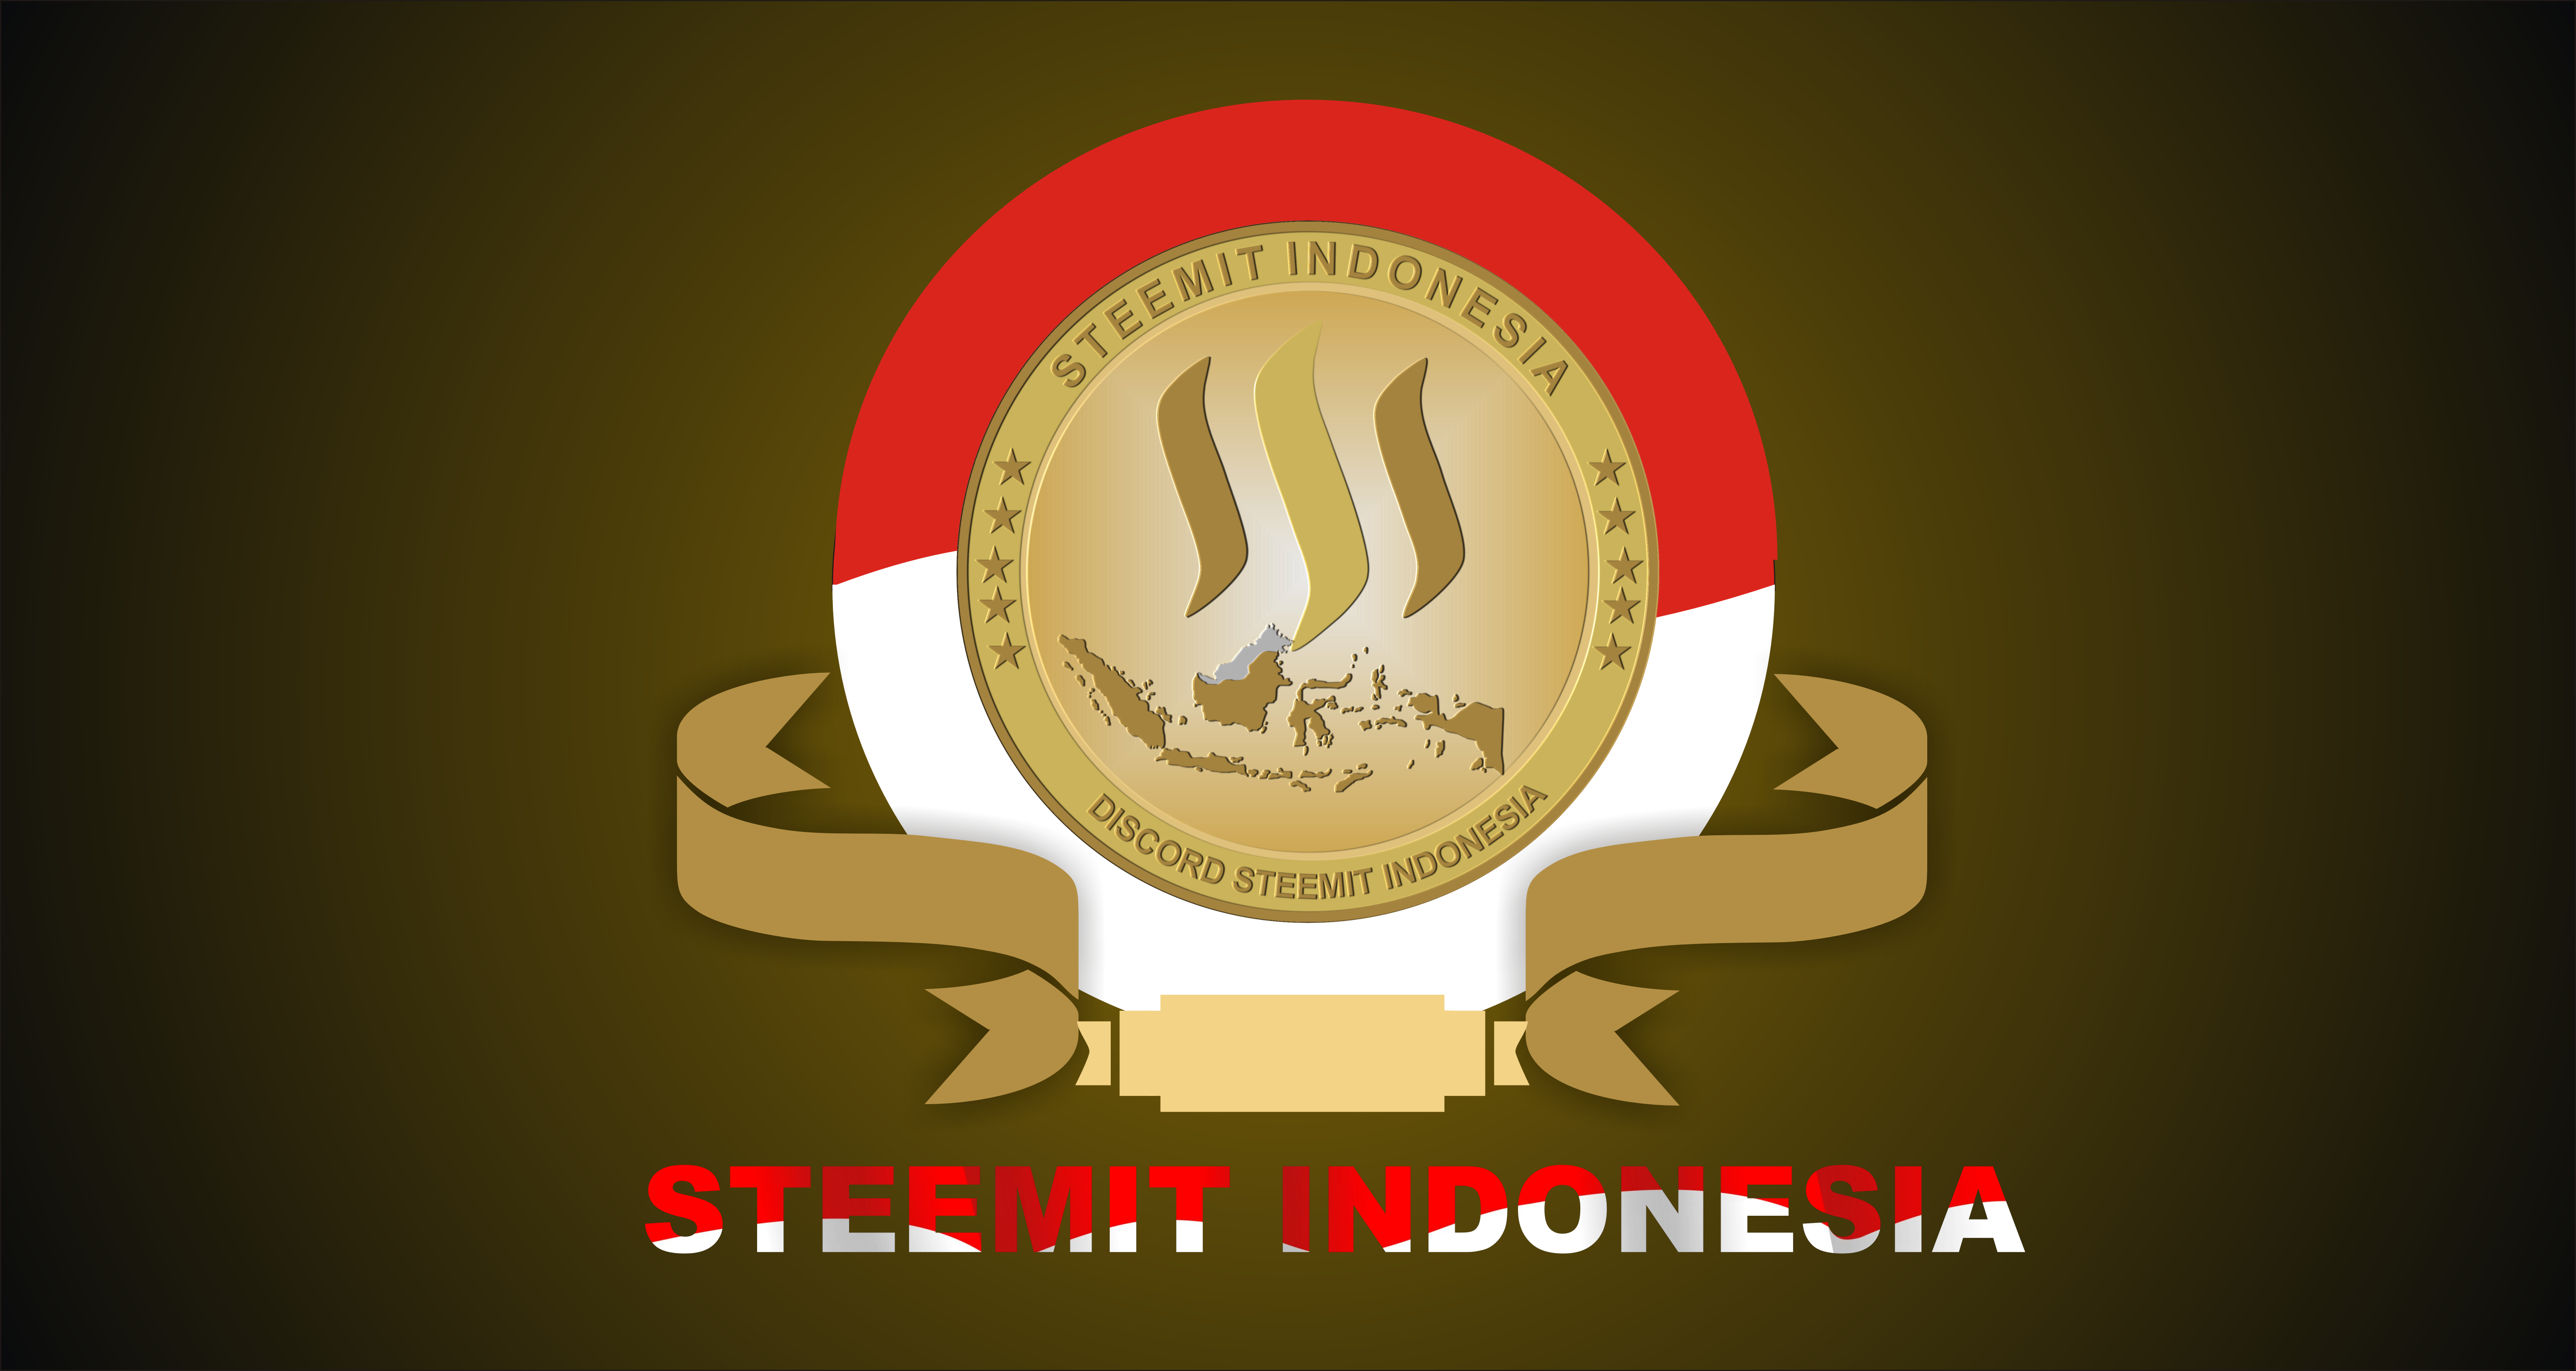 COIN steemit indonesia.png